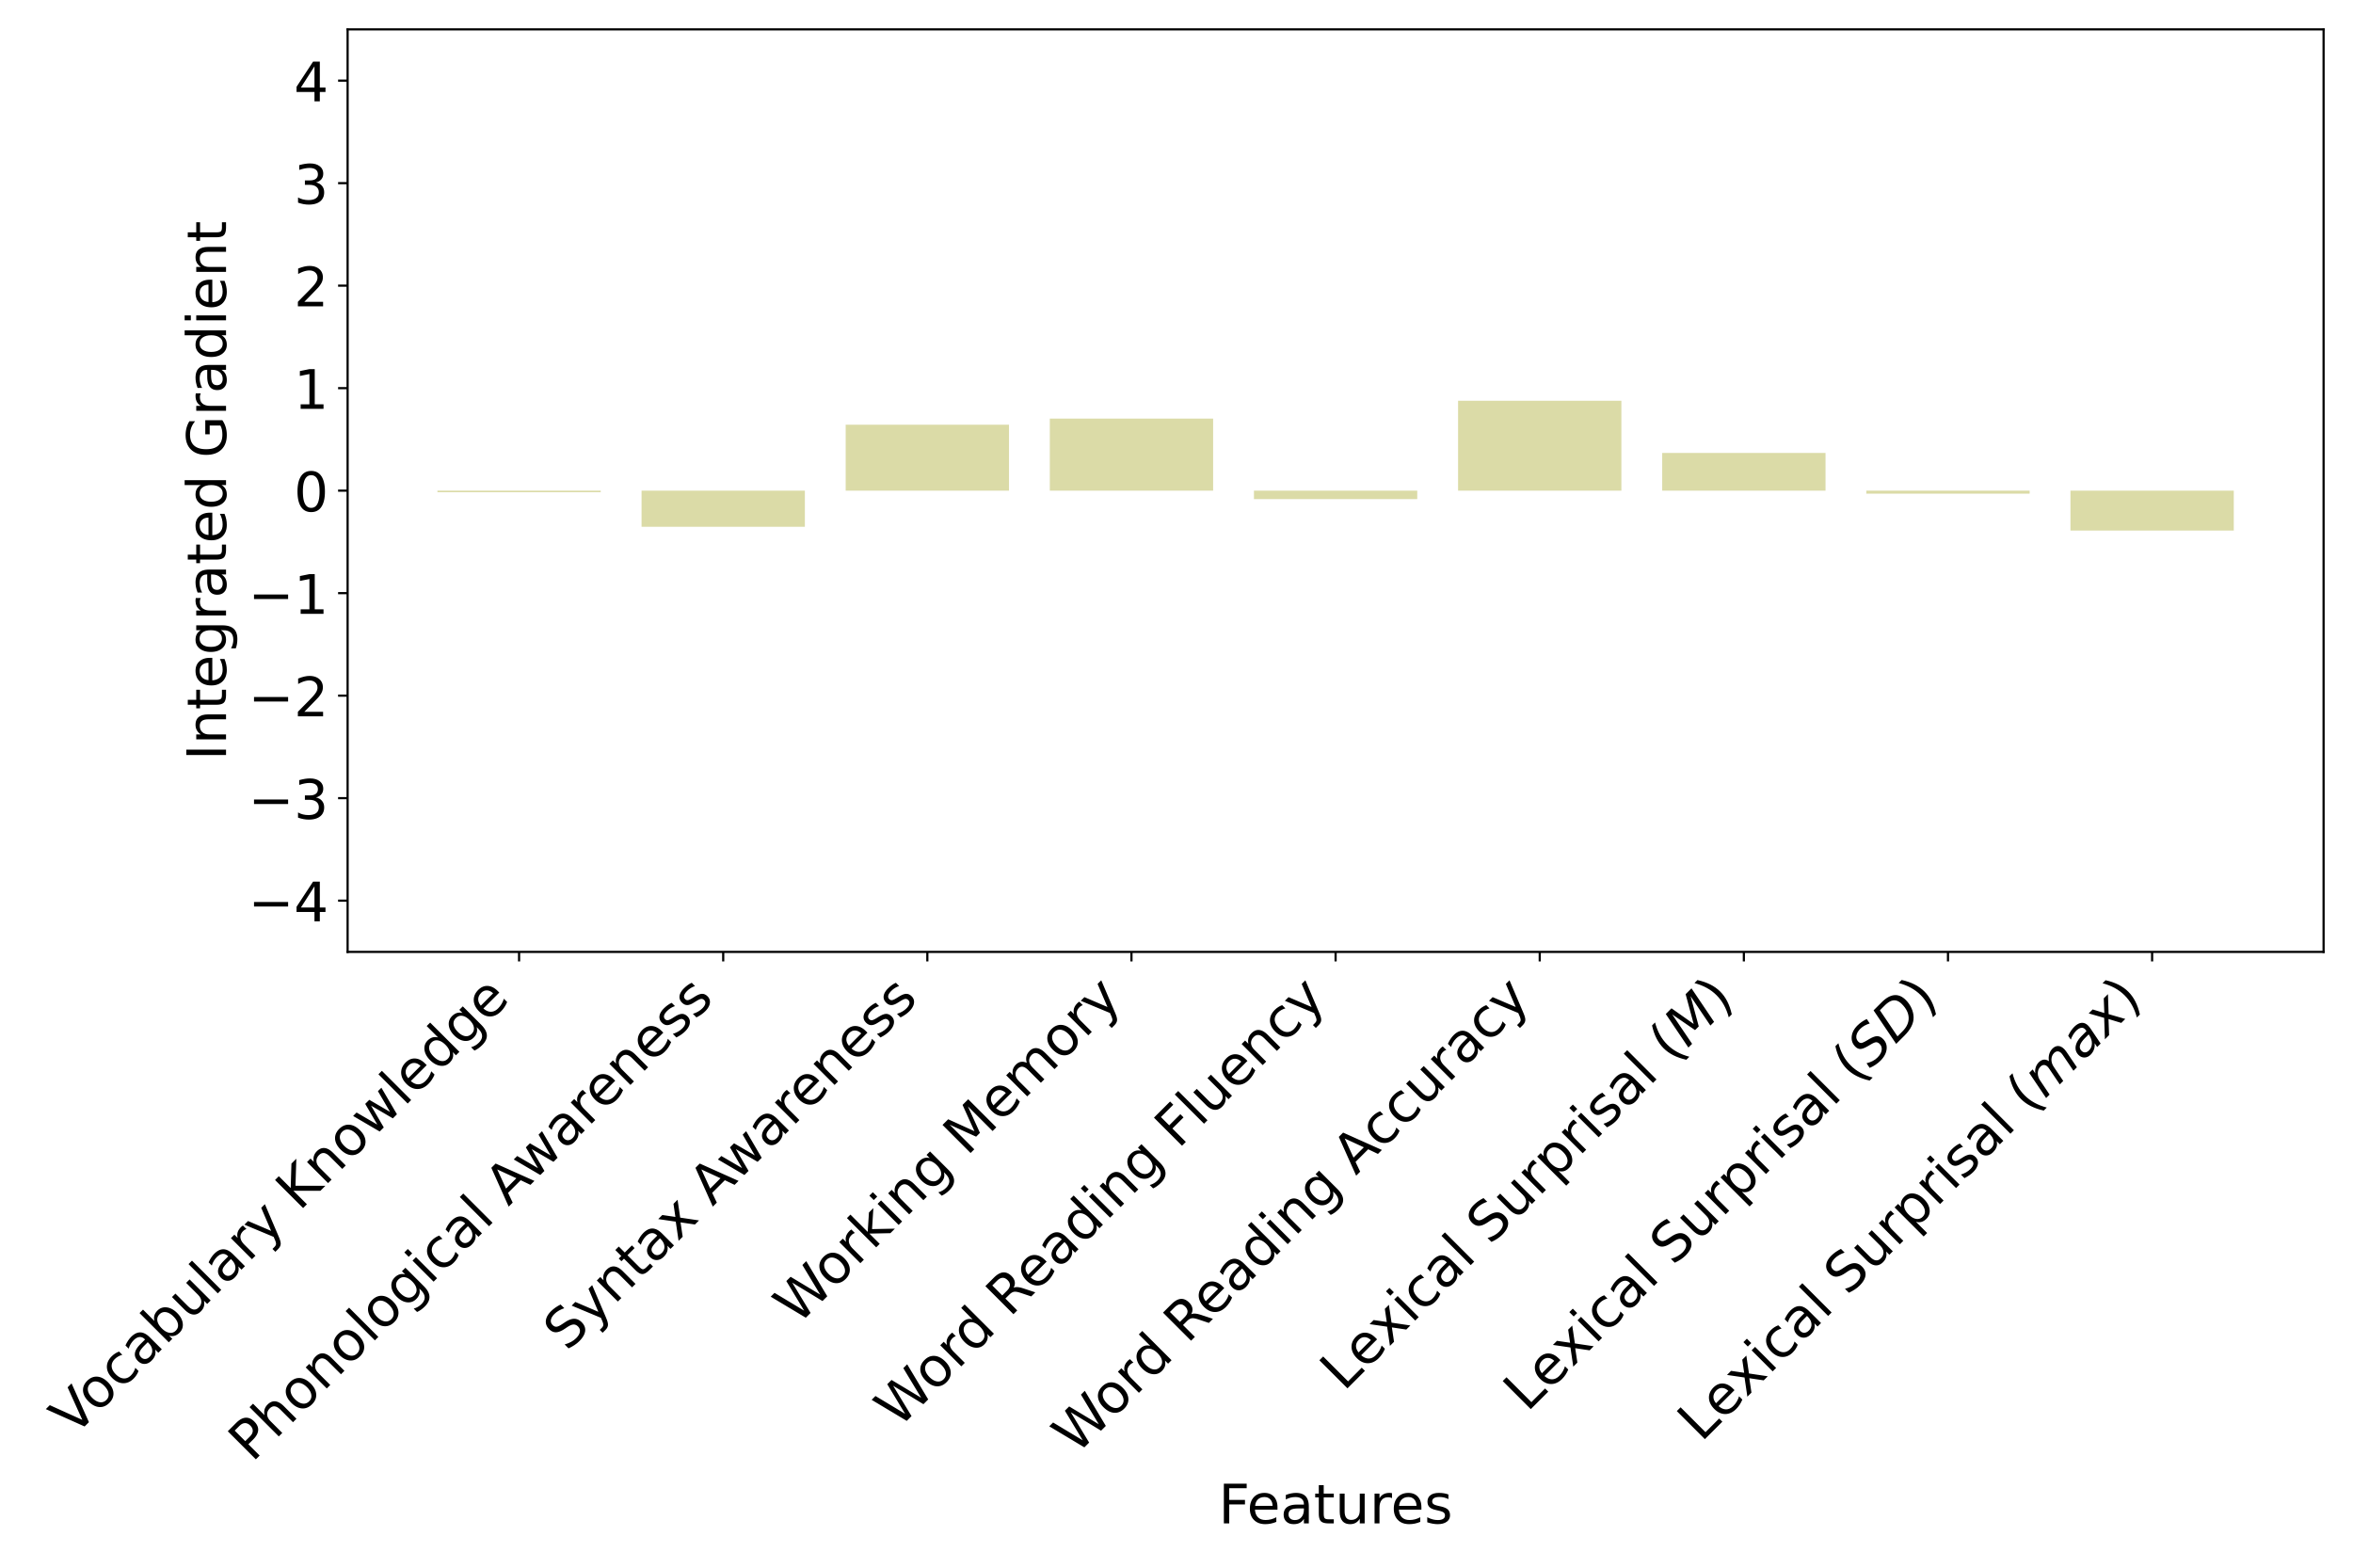 A bar chart showing integrated gradient value for each text feature in the base + lexical surprisal model.